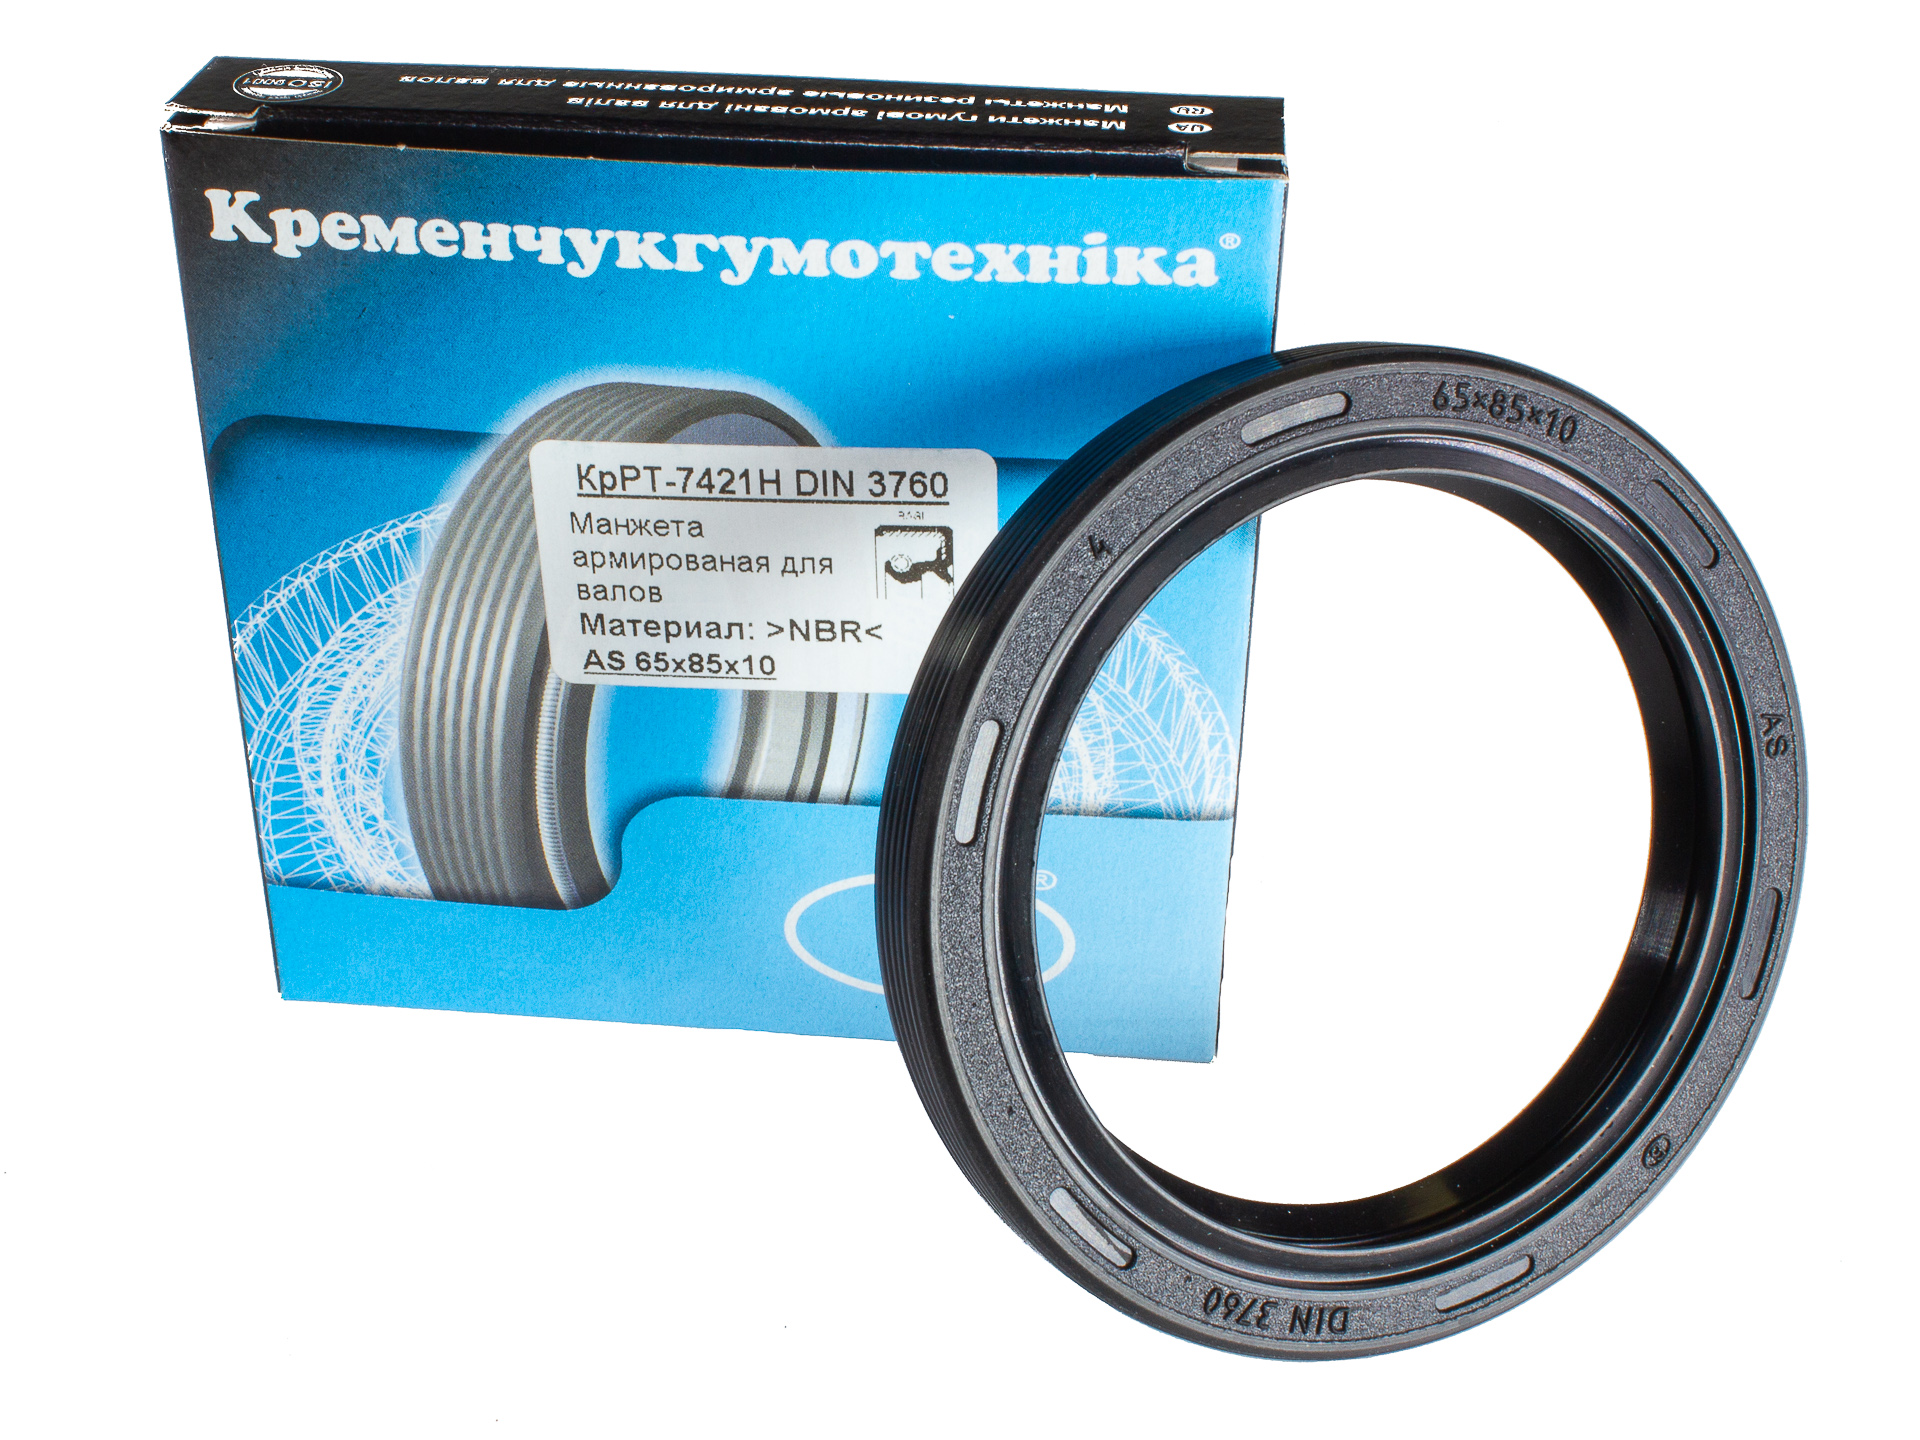 height, model Rotary shaft oil seal 24 x 36 x pack 